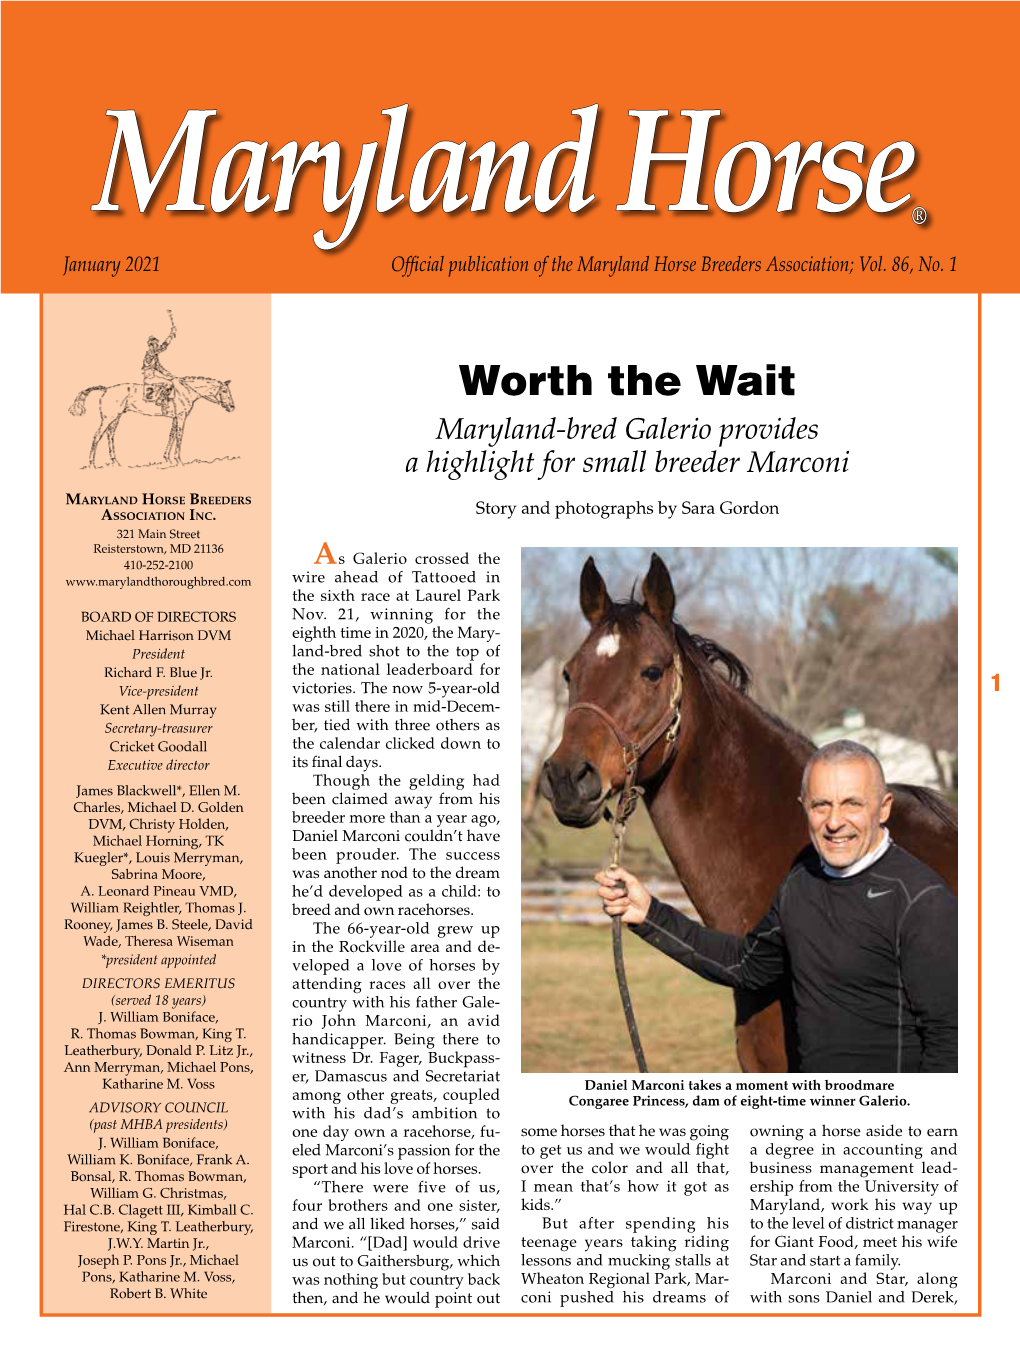 Worth the Wait Maryland-Bred Galerio Provides a Highlight for Small Breeder Marconi